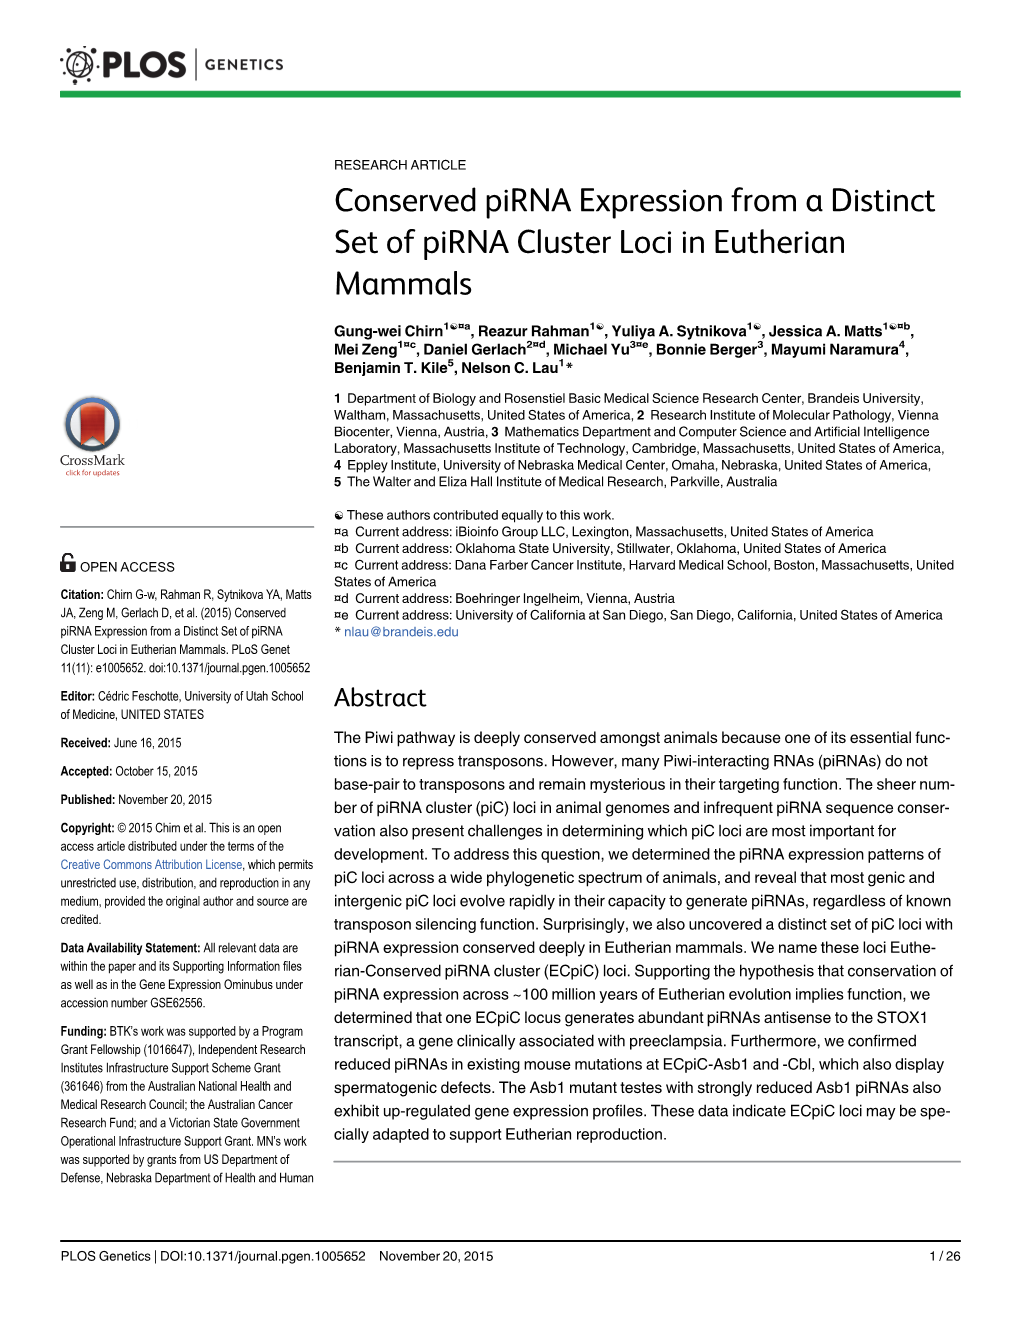 Conserved Pirna Expression from a Distinct Set of Pirna Cluster Loci in Eutherian Mammals